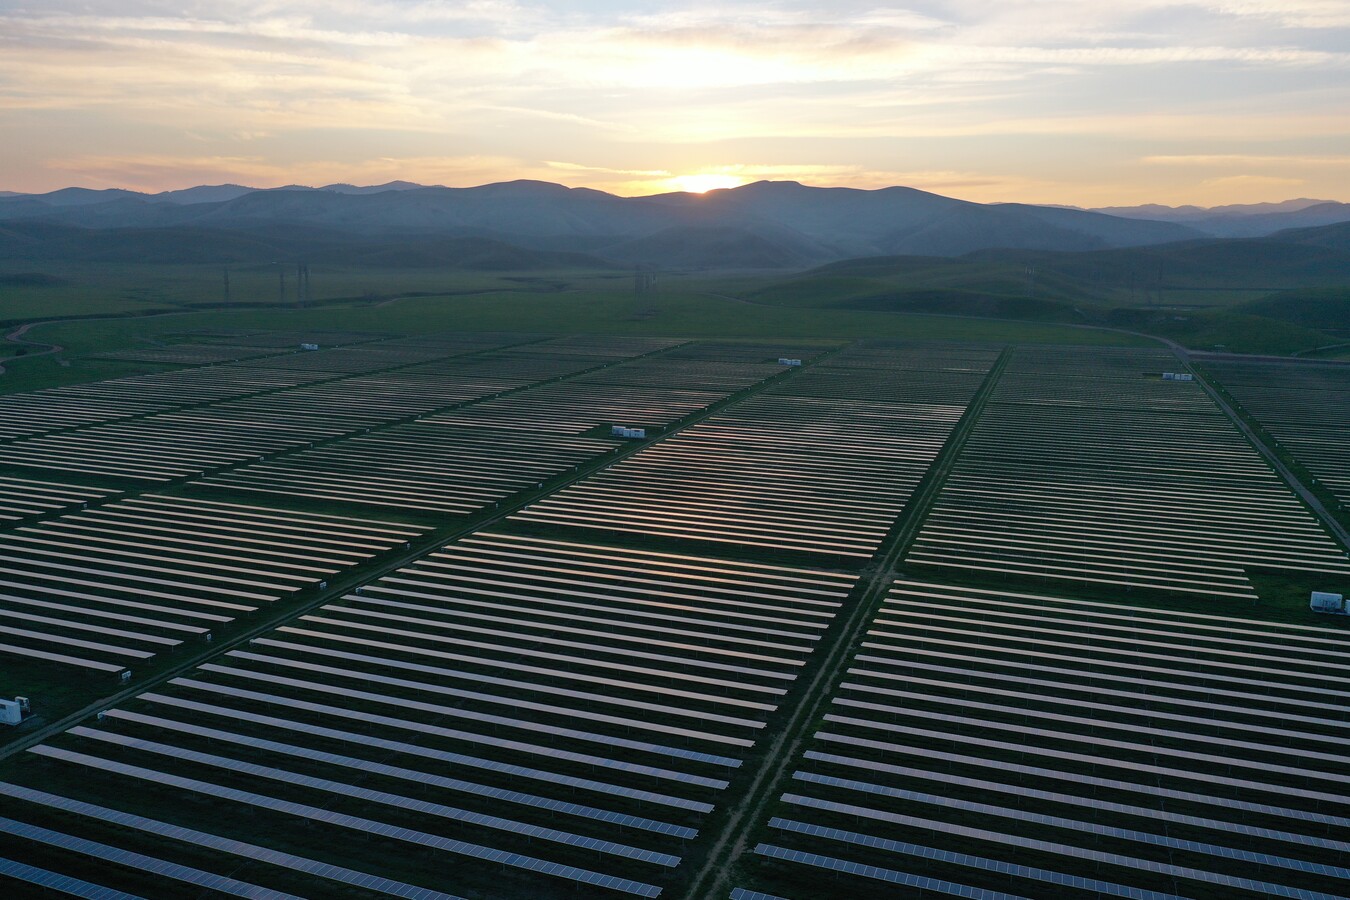 A large utility-scale solar farm with rows of solar panels against green mountains at dusk.